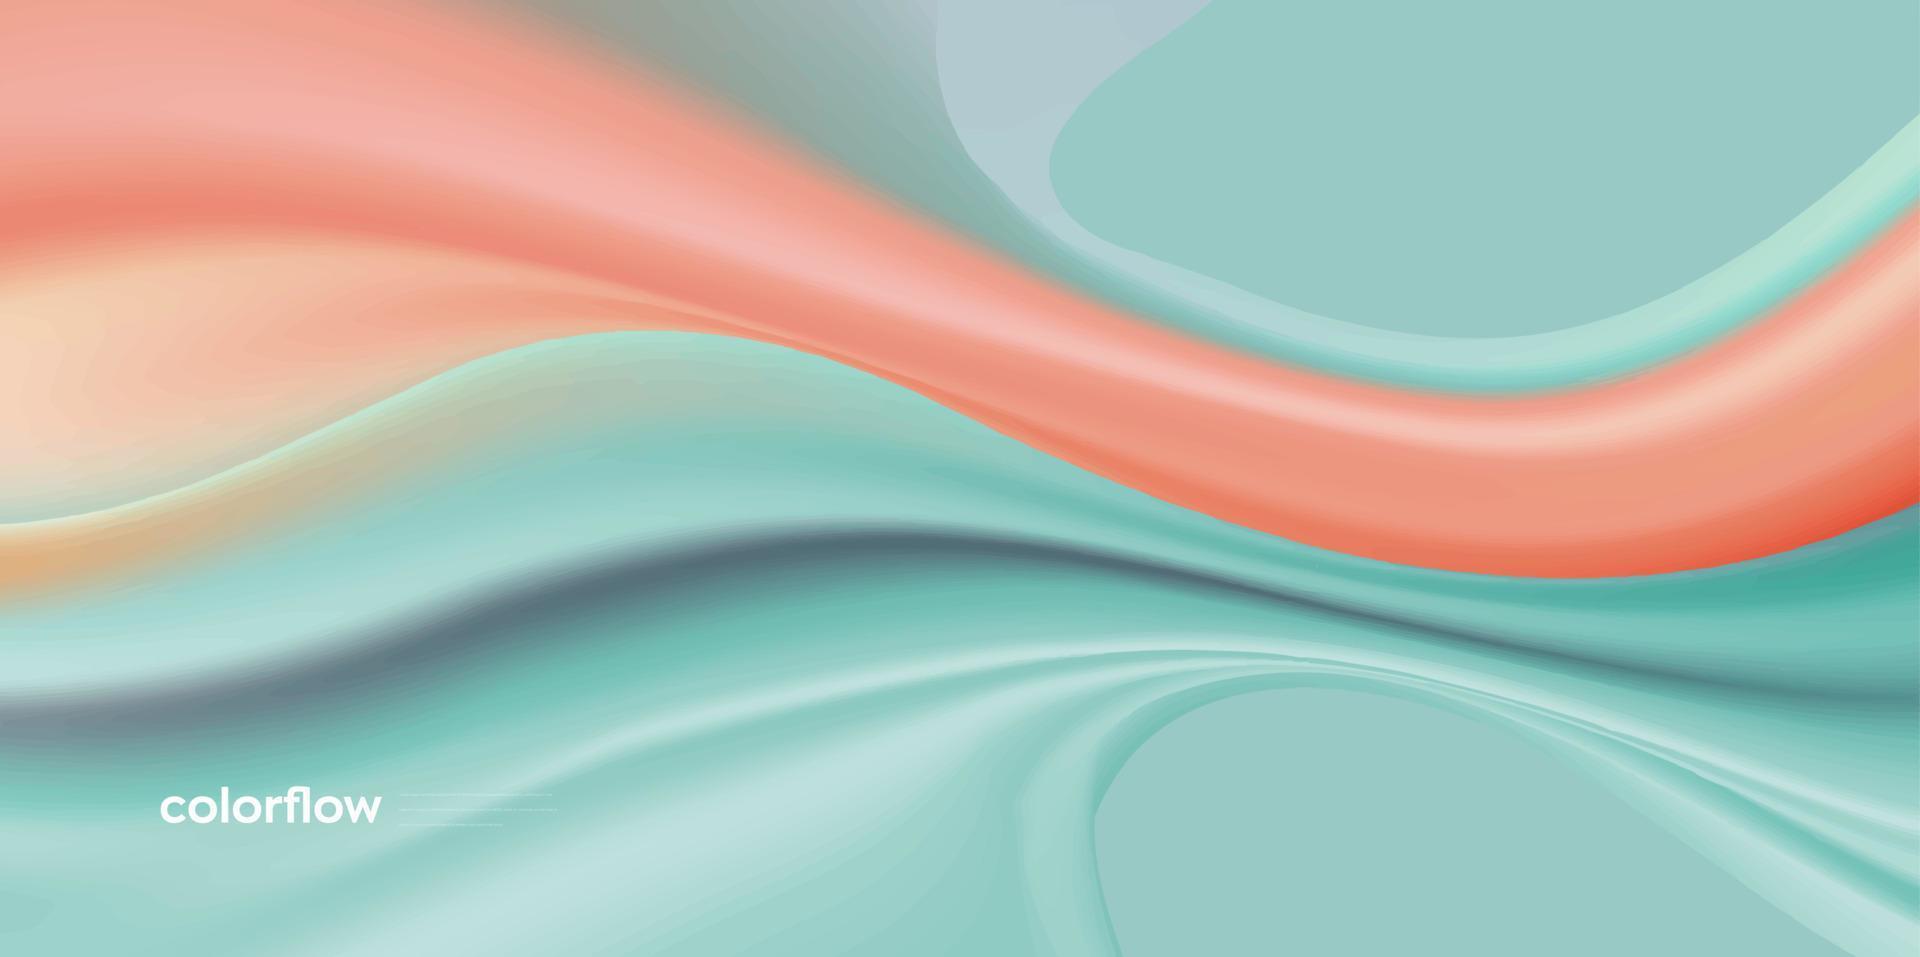 Abstract liquid background with turquoise colorflow vector